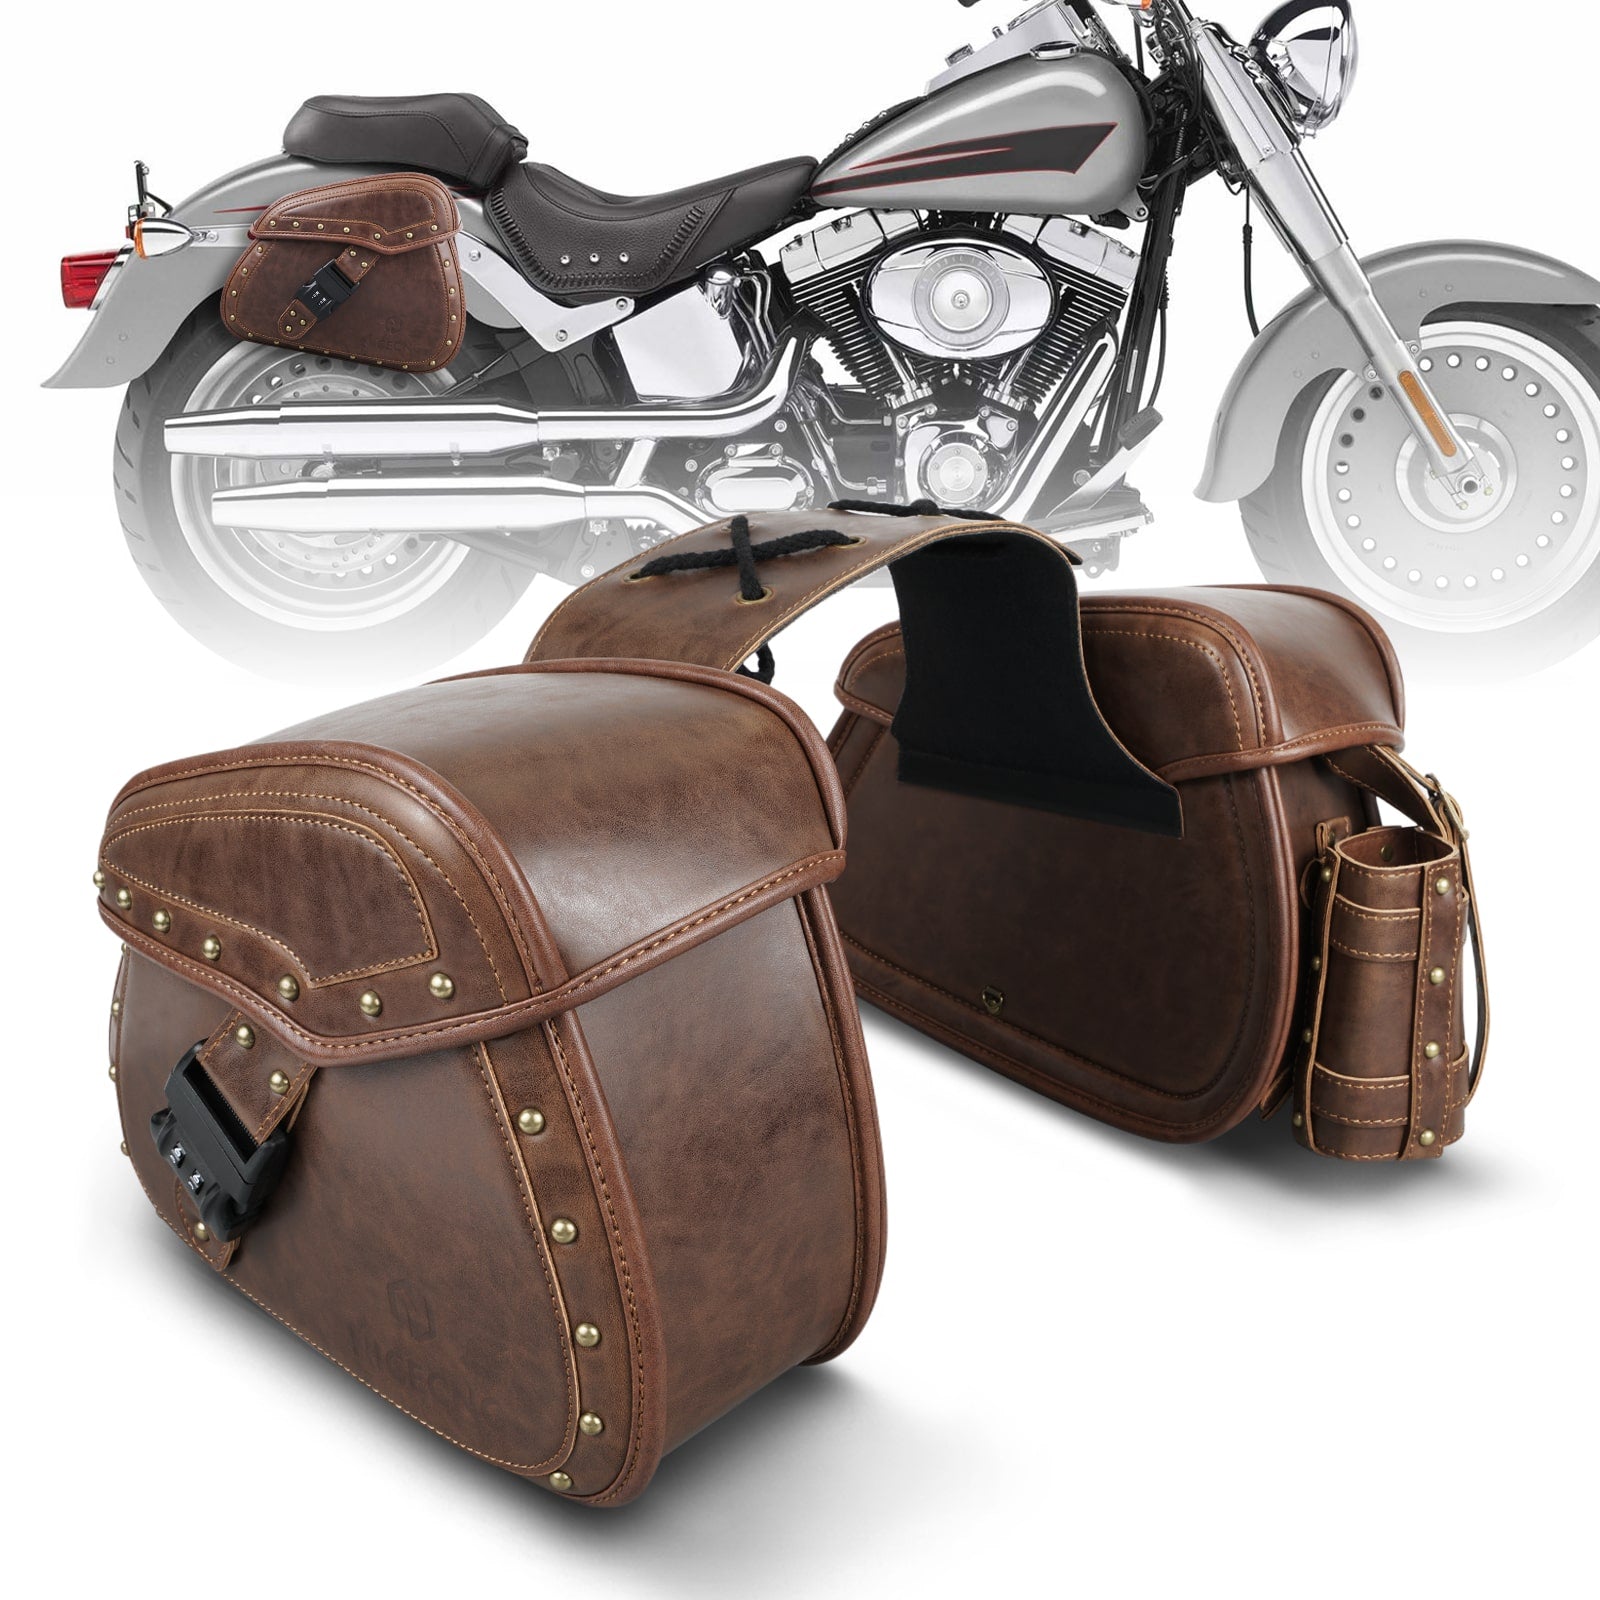 PU leather Motorcycle Saddle Bags with Cup Holder & Lock for Universal Motorcycle